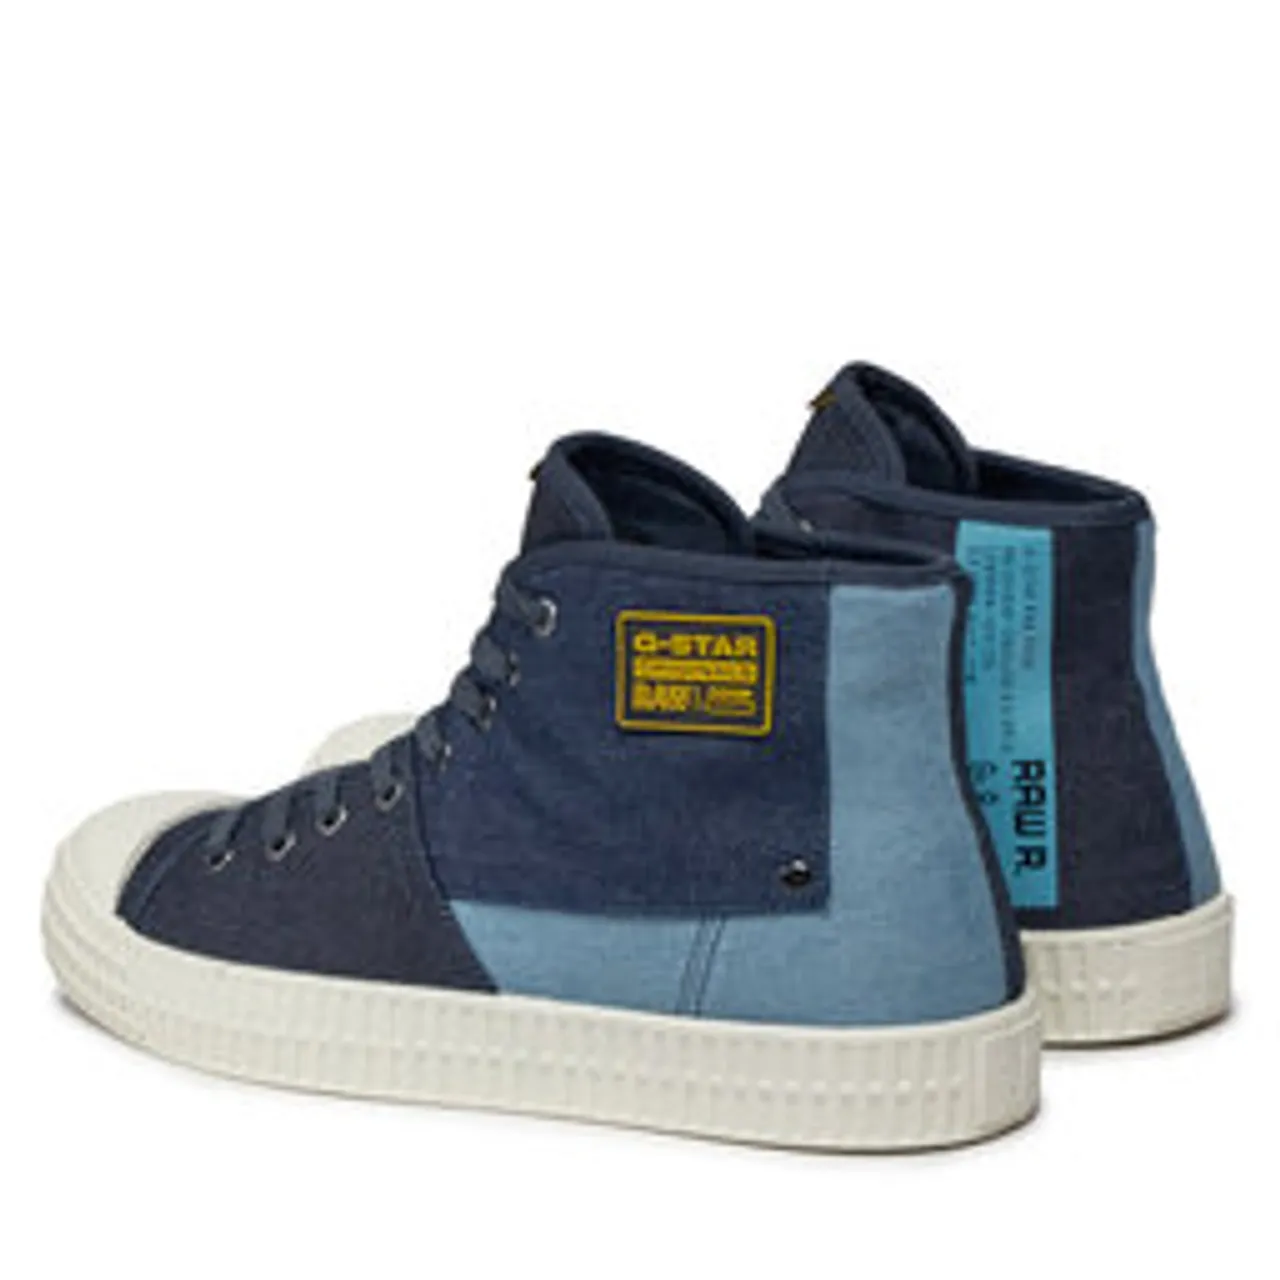 Sneakers aus Stoff G-Star Raw Rovulc III Mid Dnm 2342 001730 Nvy